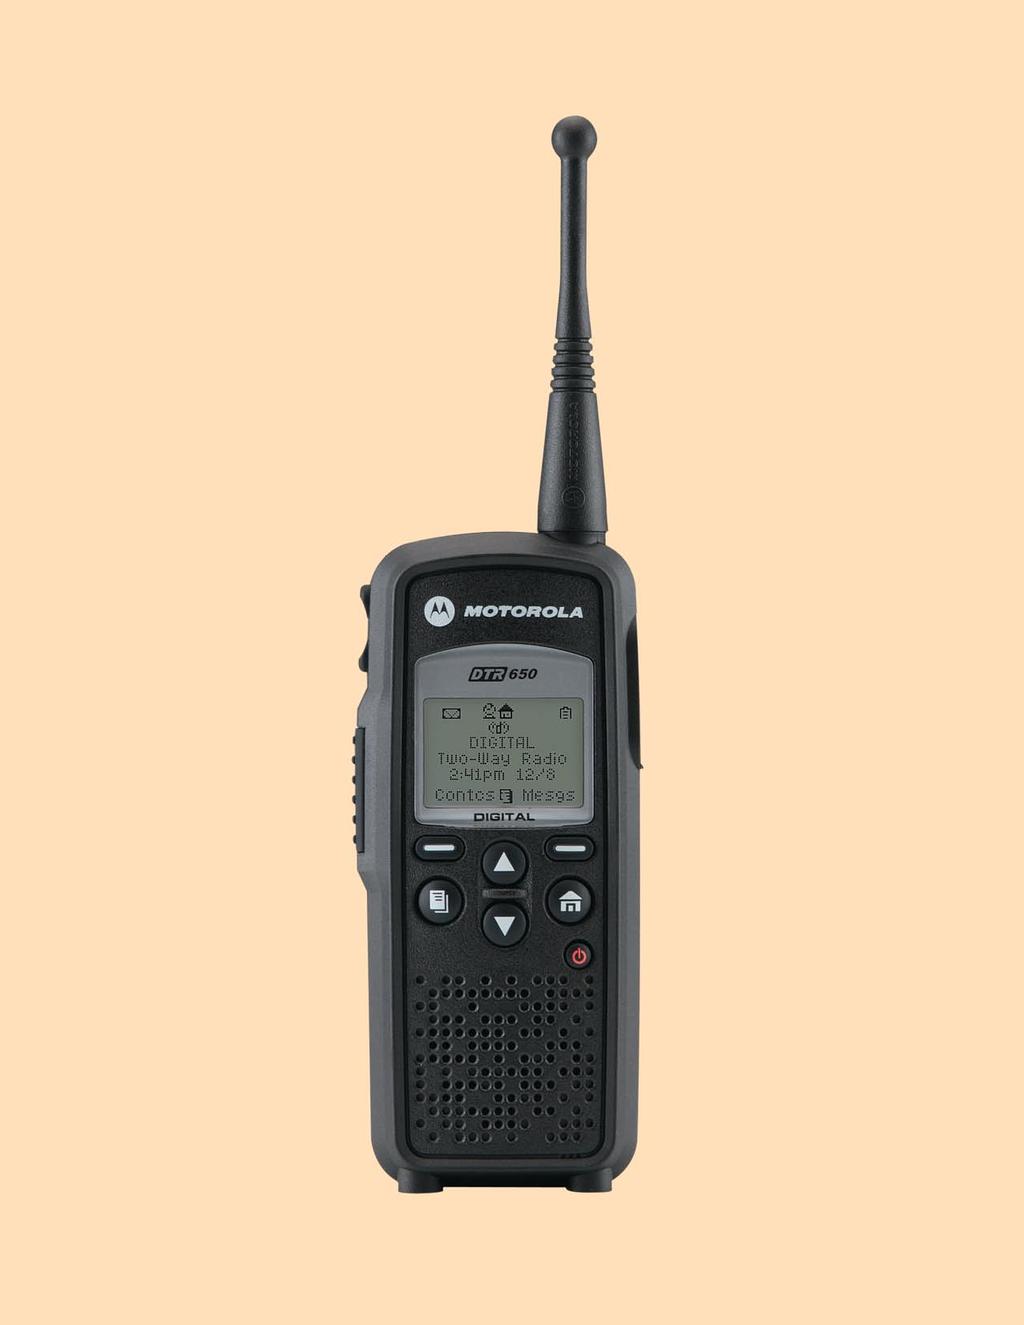 Digital On-Site Two-Way Radio Features Antenna Volume Controls Audio Jack Connect audio accessories Push-To-Talk (PTT) Button Option Keys Use to select display options Home Key Menu Key Use to exit